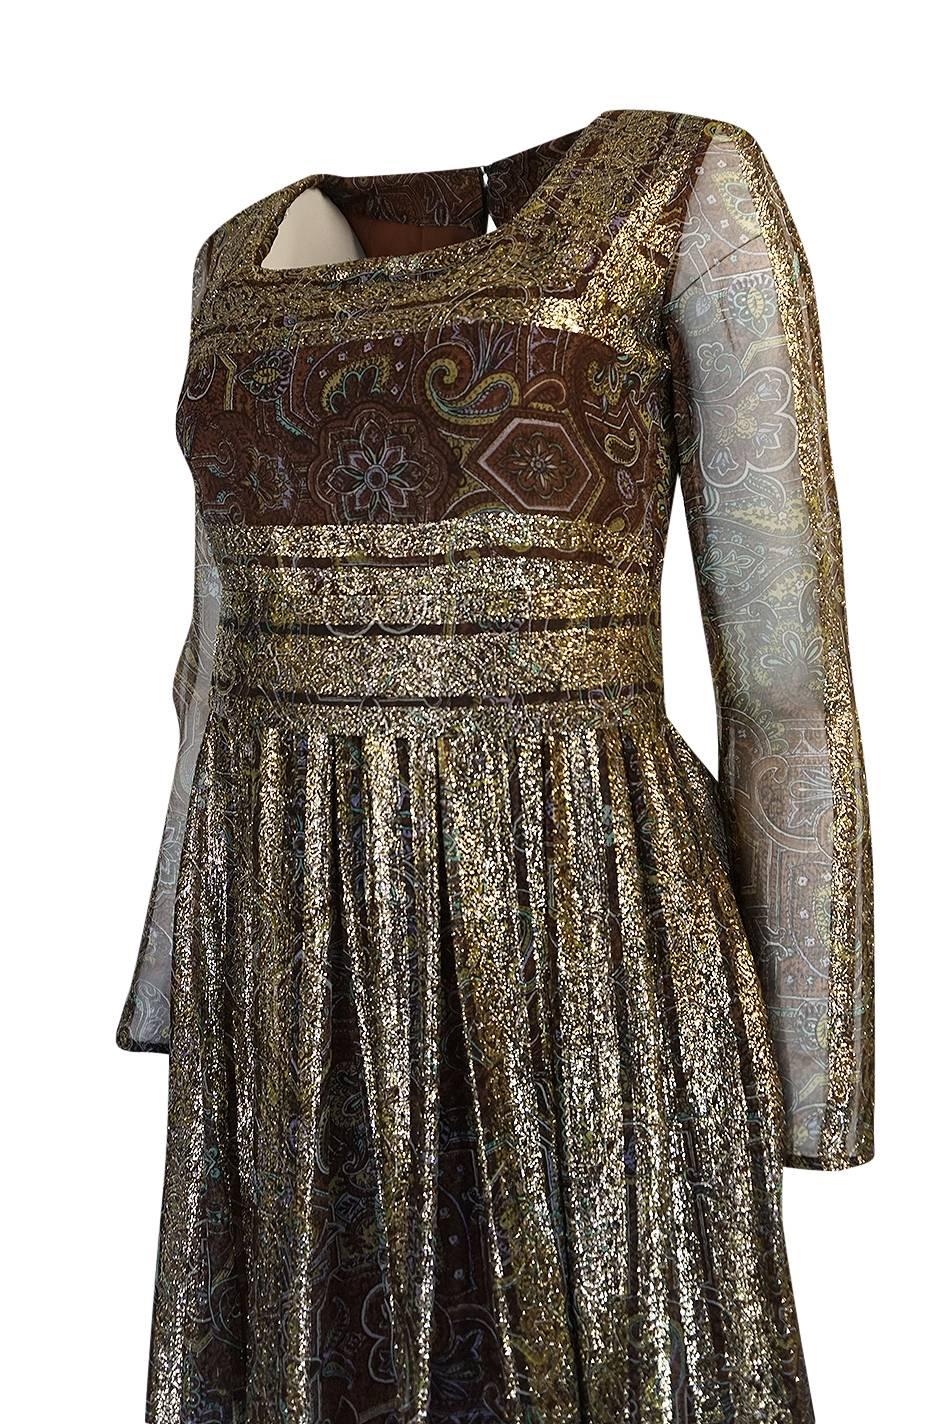 Christian Dior by Marc Bohan Demi-Couture Gold and Printed Silk Dress, c 1968 3